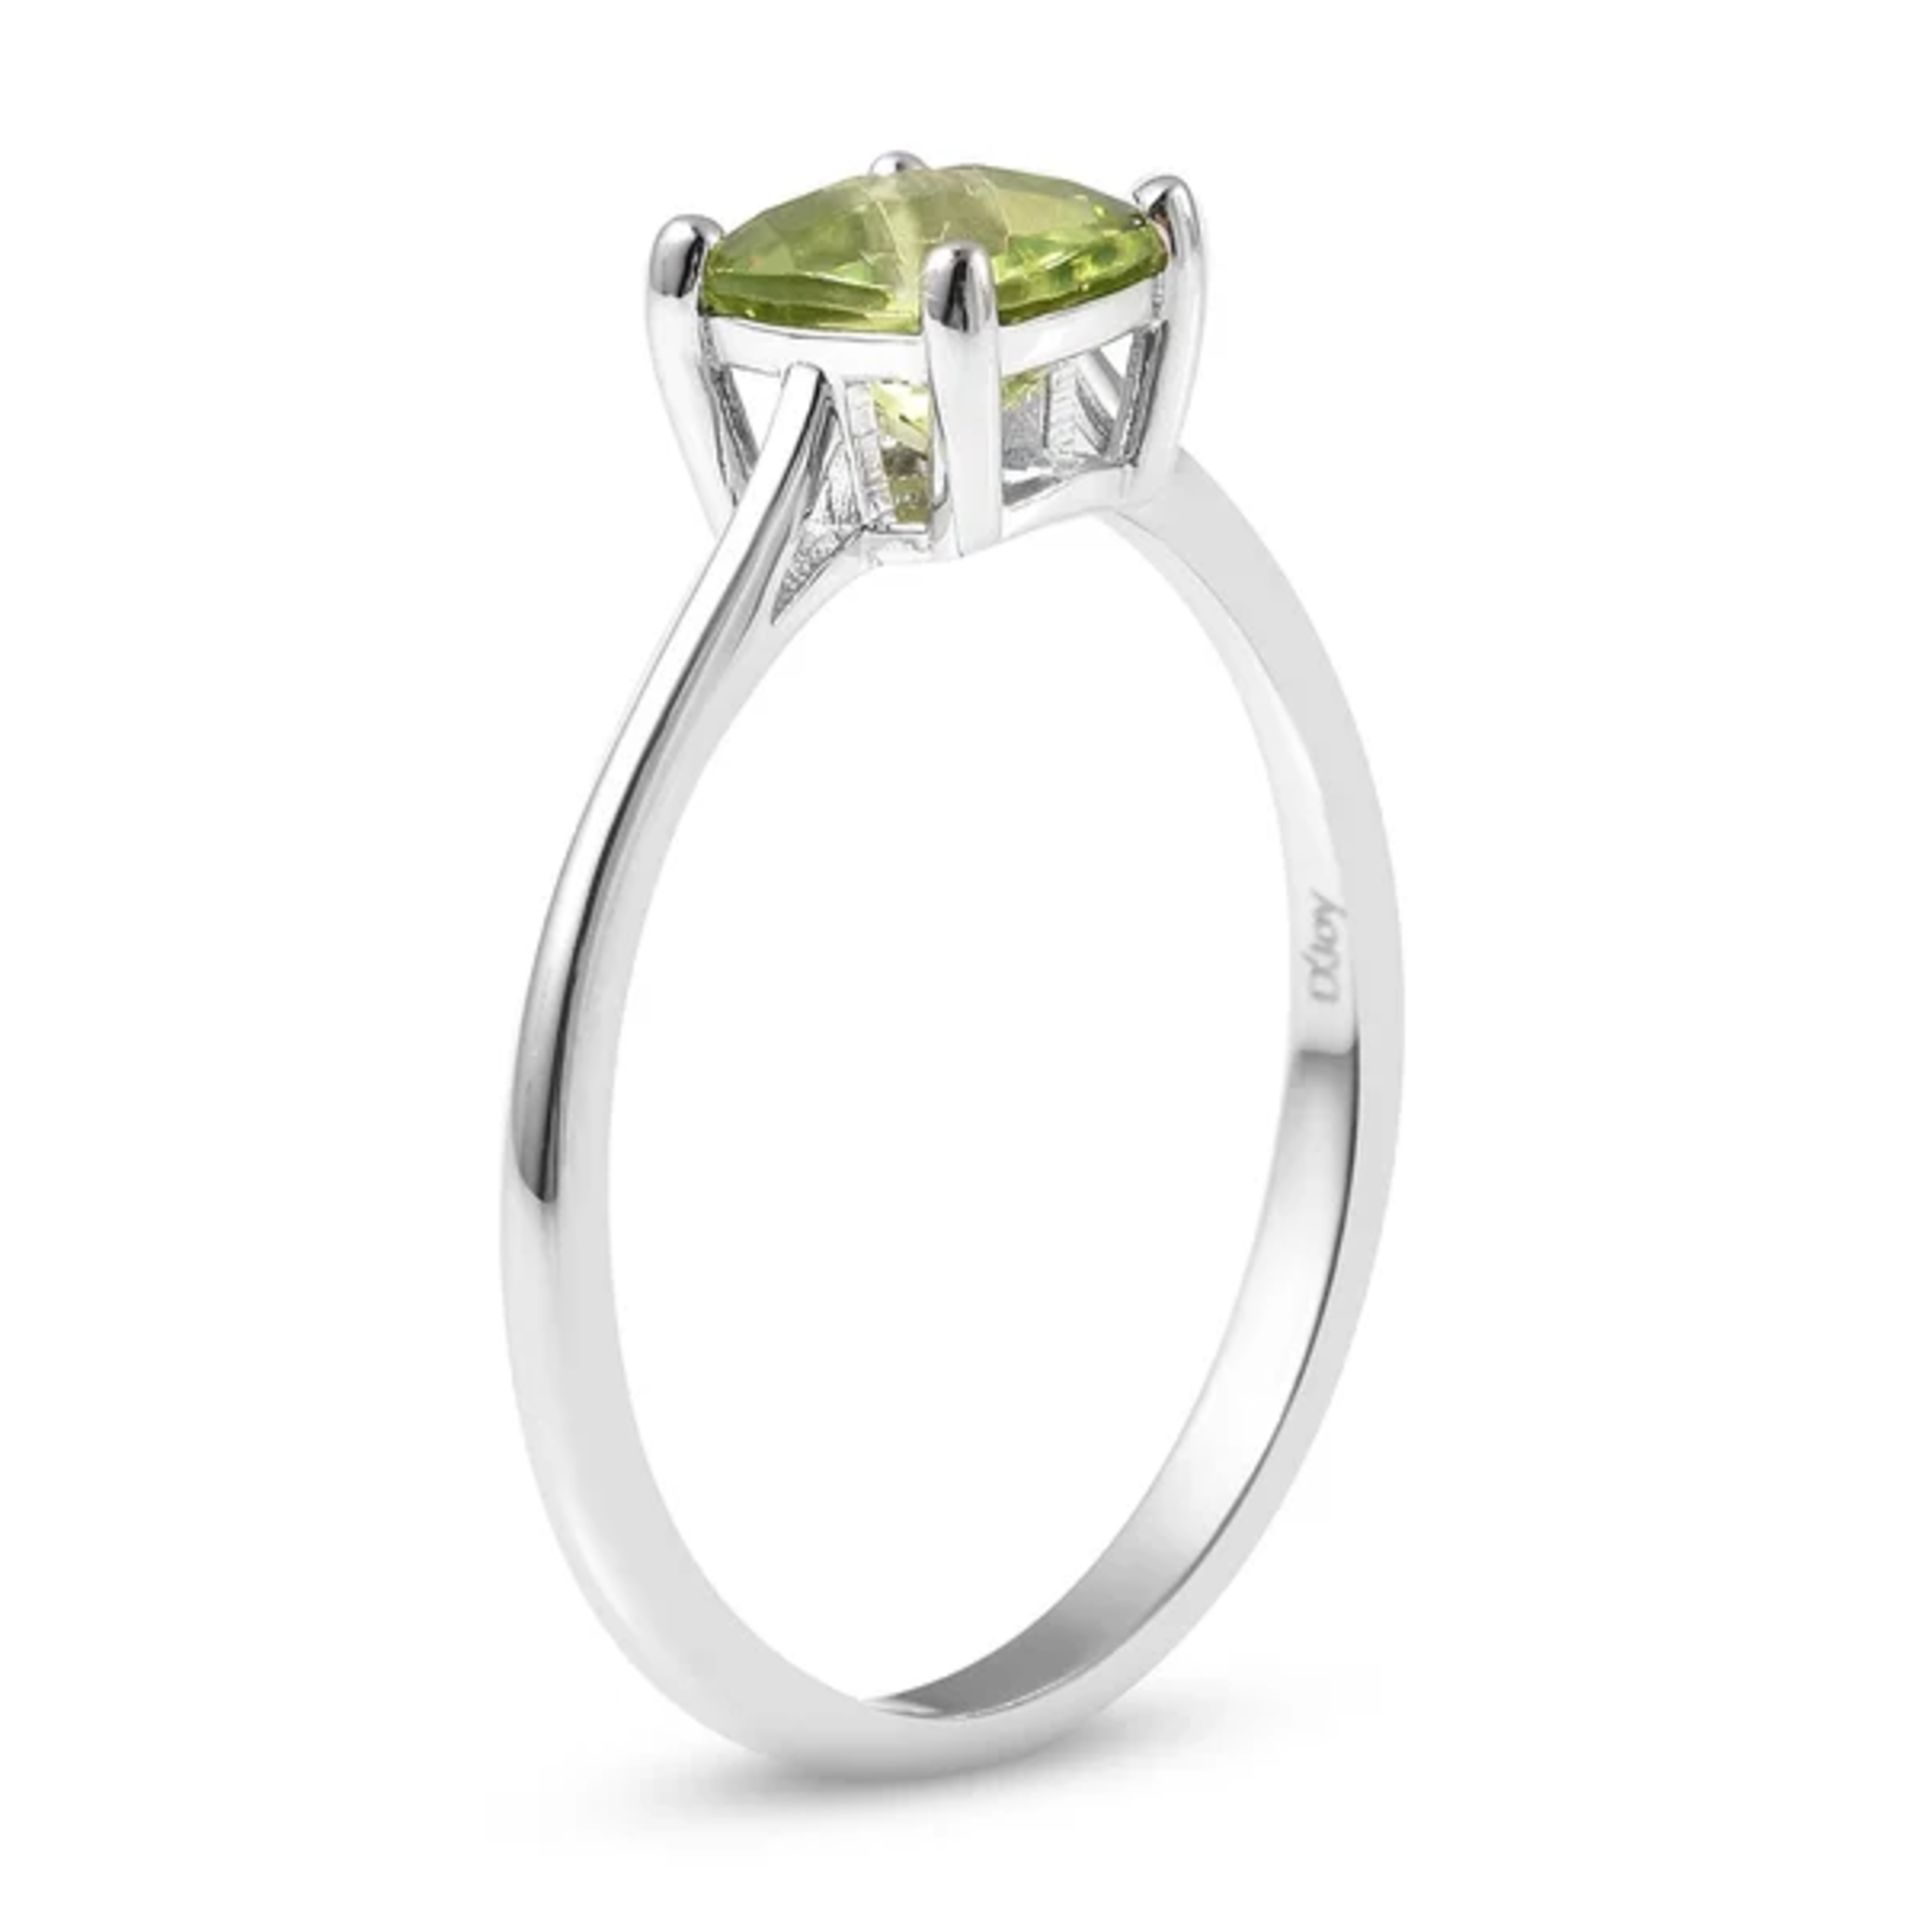 New! 3 Piece Set - Hebei Peridot Solitaire Ring, Pendant and Stud Earrings - Image 4 of 7